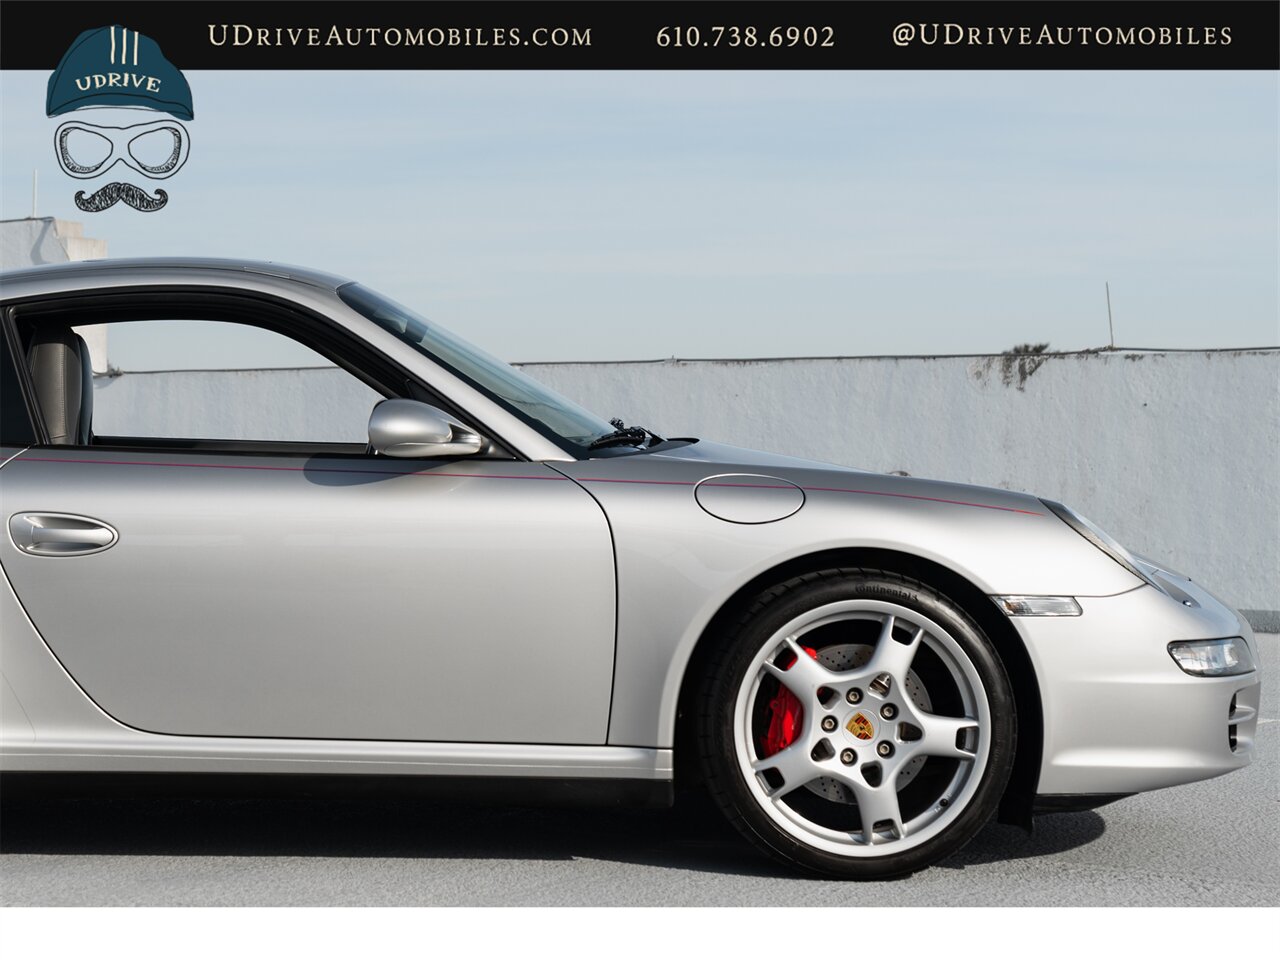 2006 Porsche 911 Carrera 4S  997 C4S 6 Speed Manual Service History - Photo 20 - West Chester, PA 19382